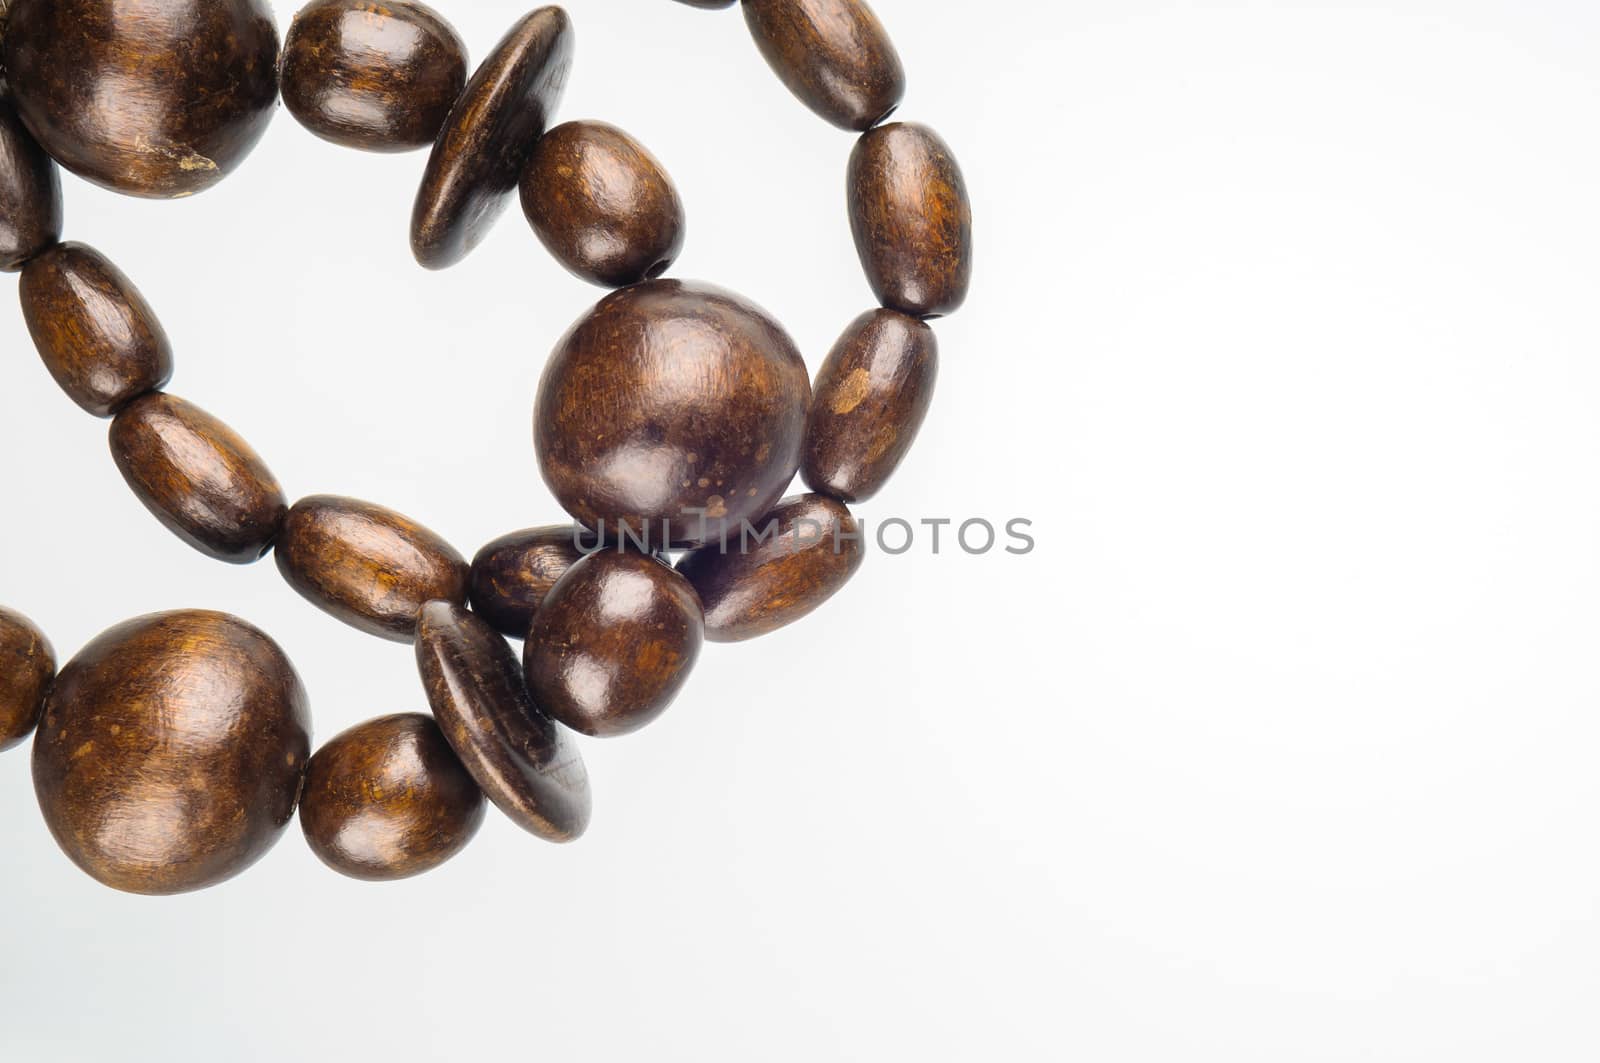 Nice wooden beads necklace, with space for copy text